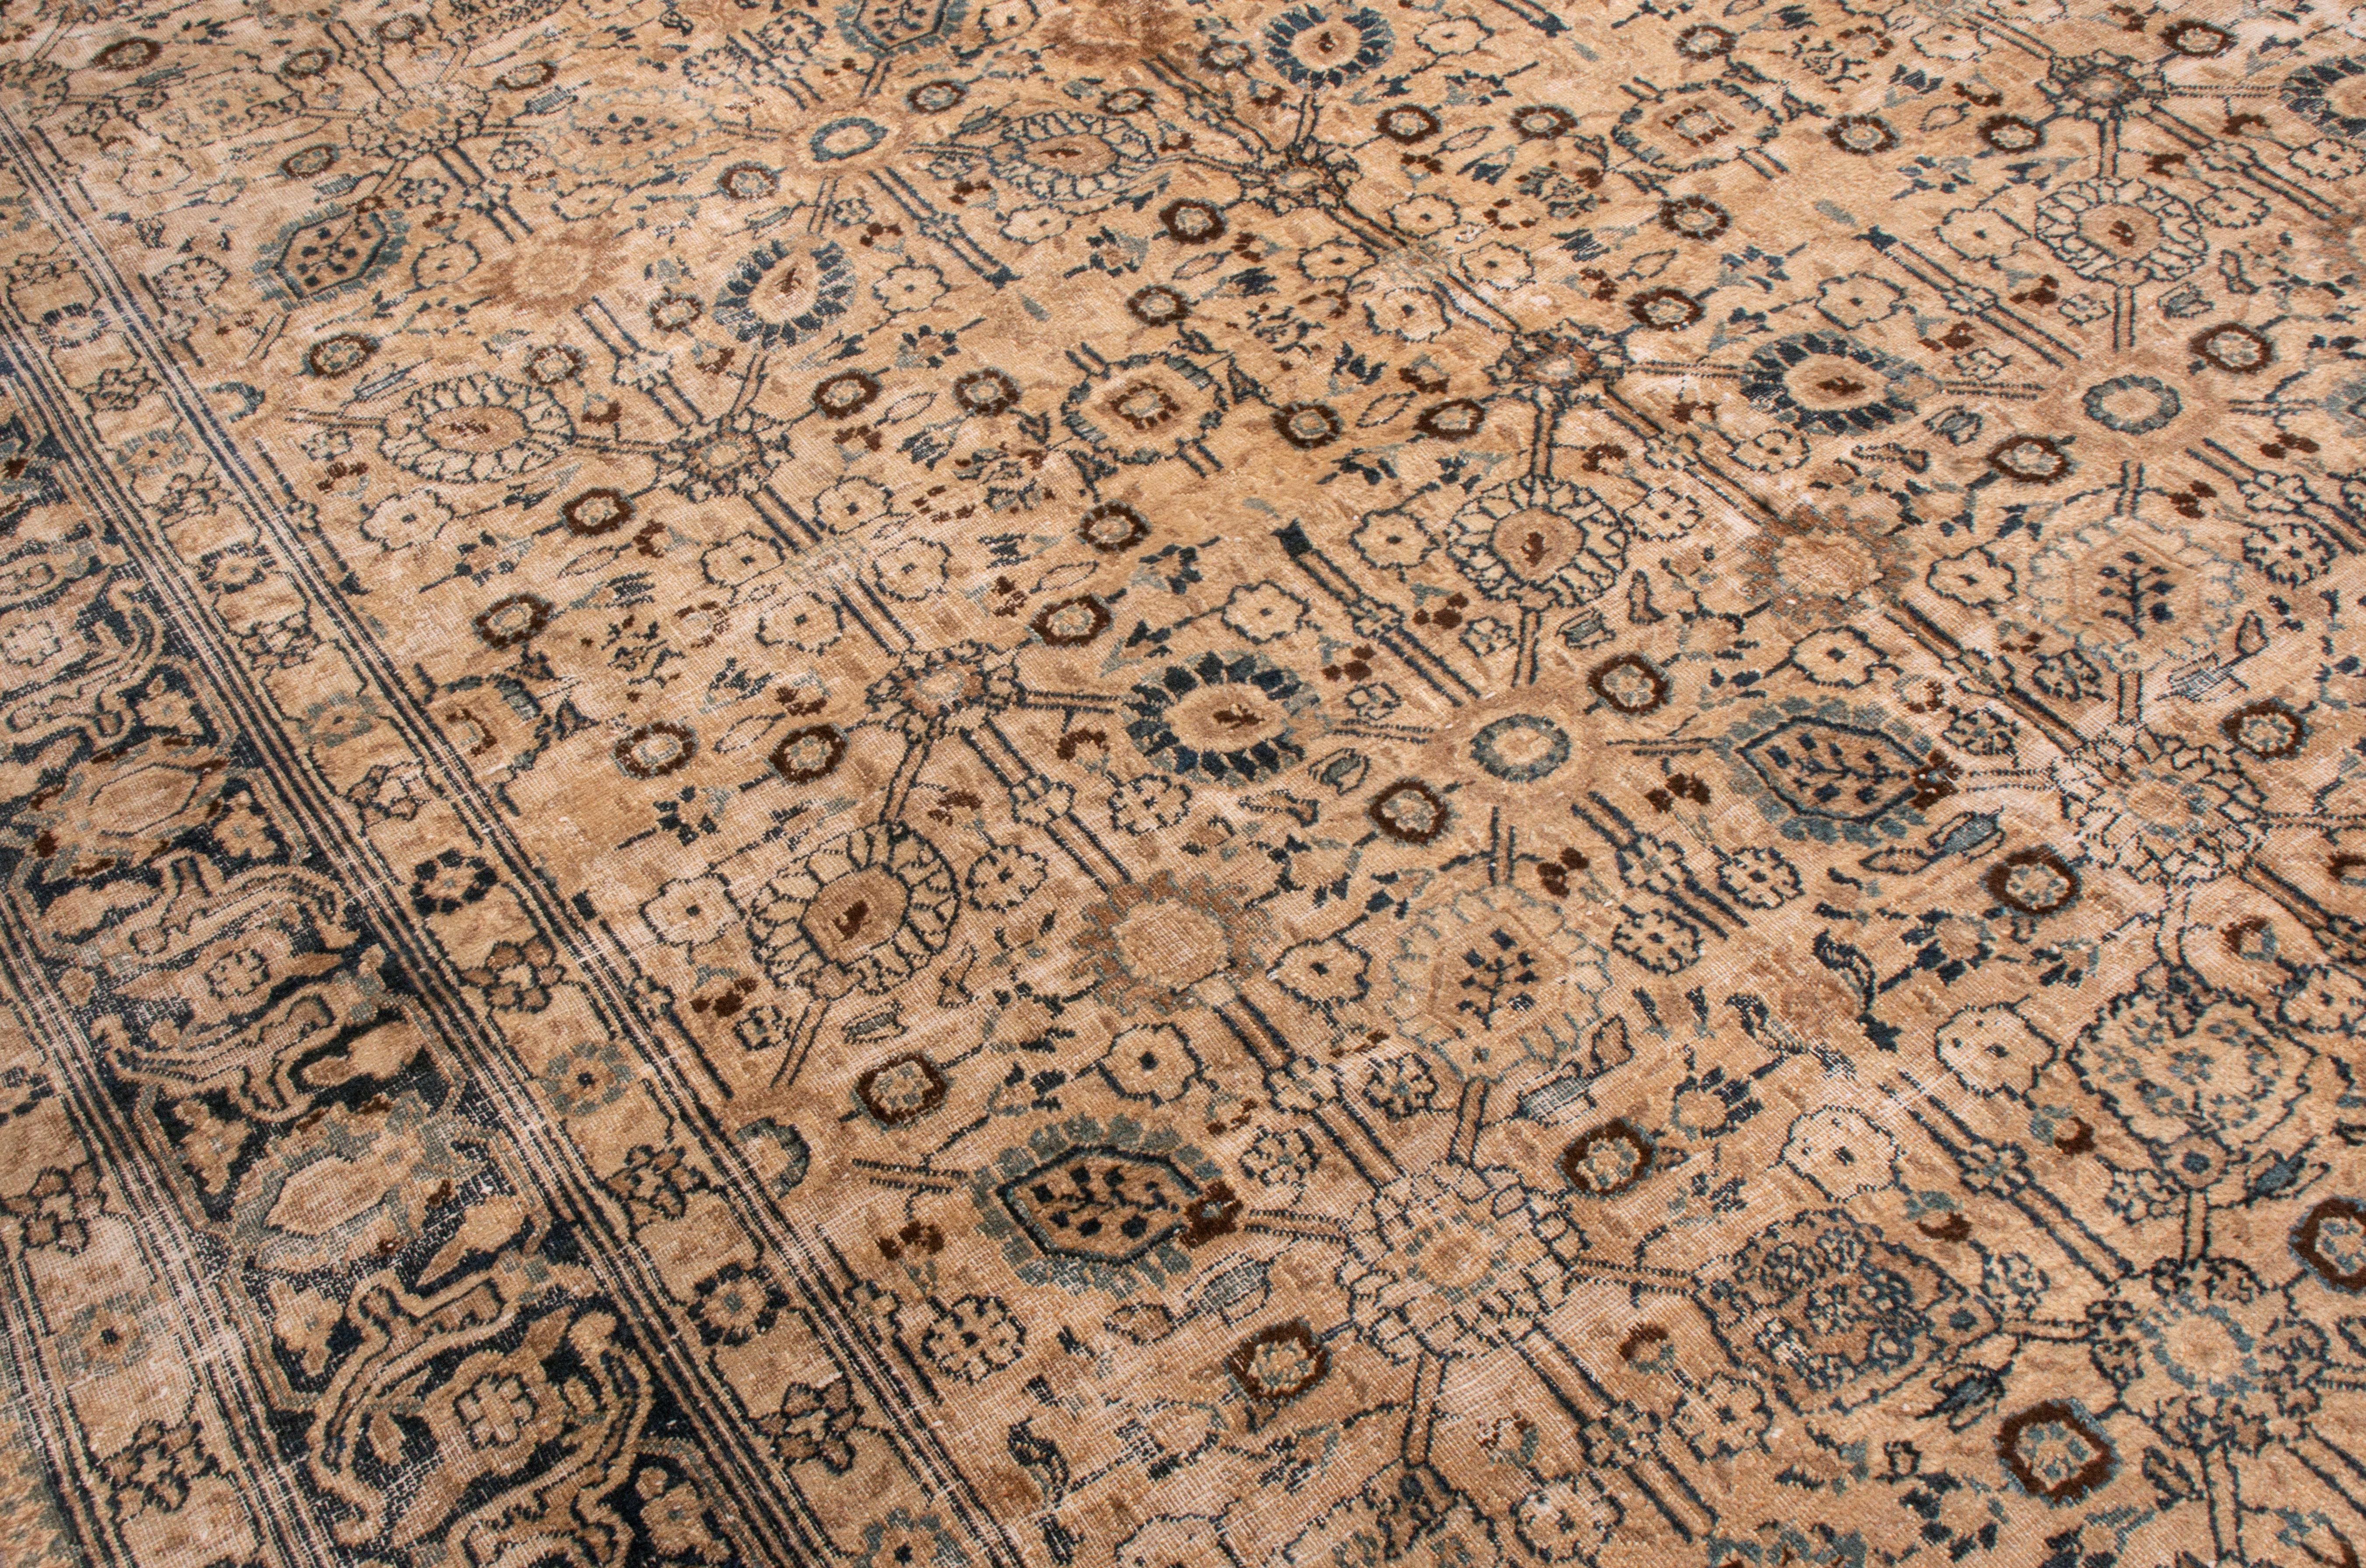 Persian Antique Doroksh Brown and Blue Wool Rug with All-Over Floral Pattern